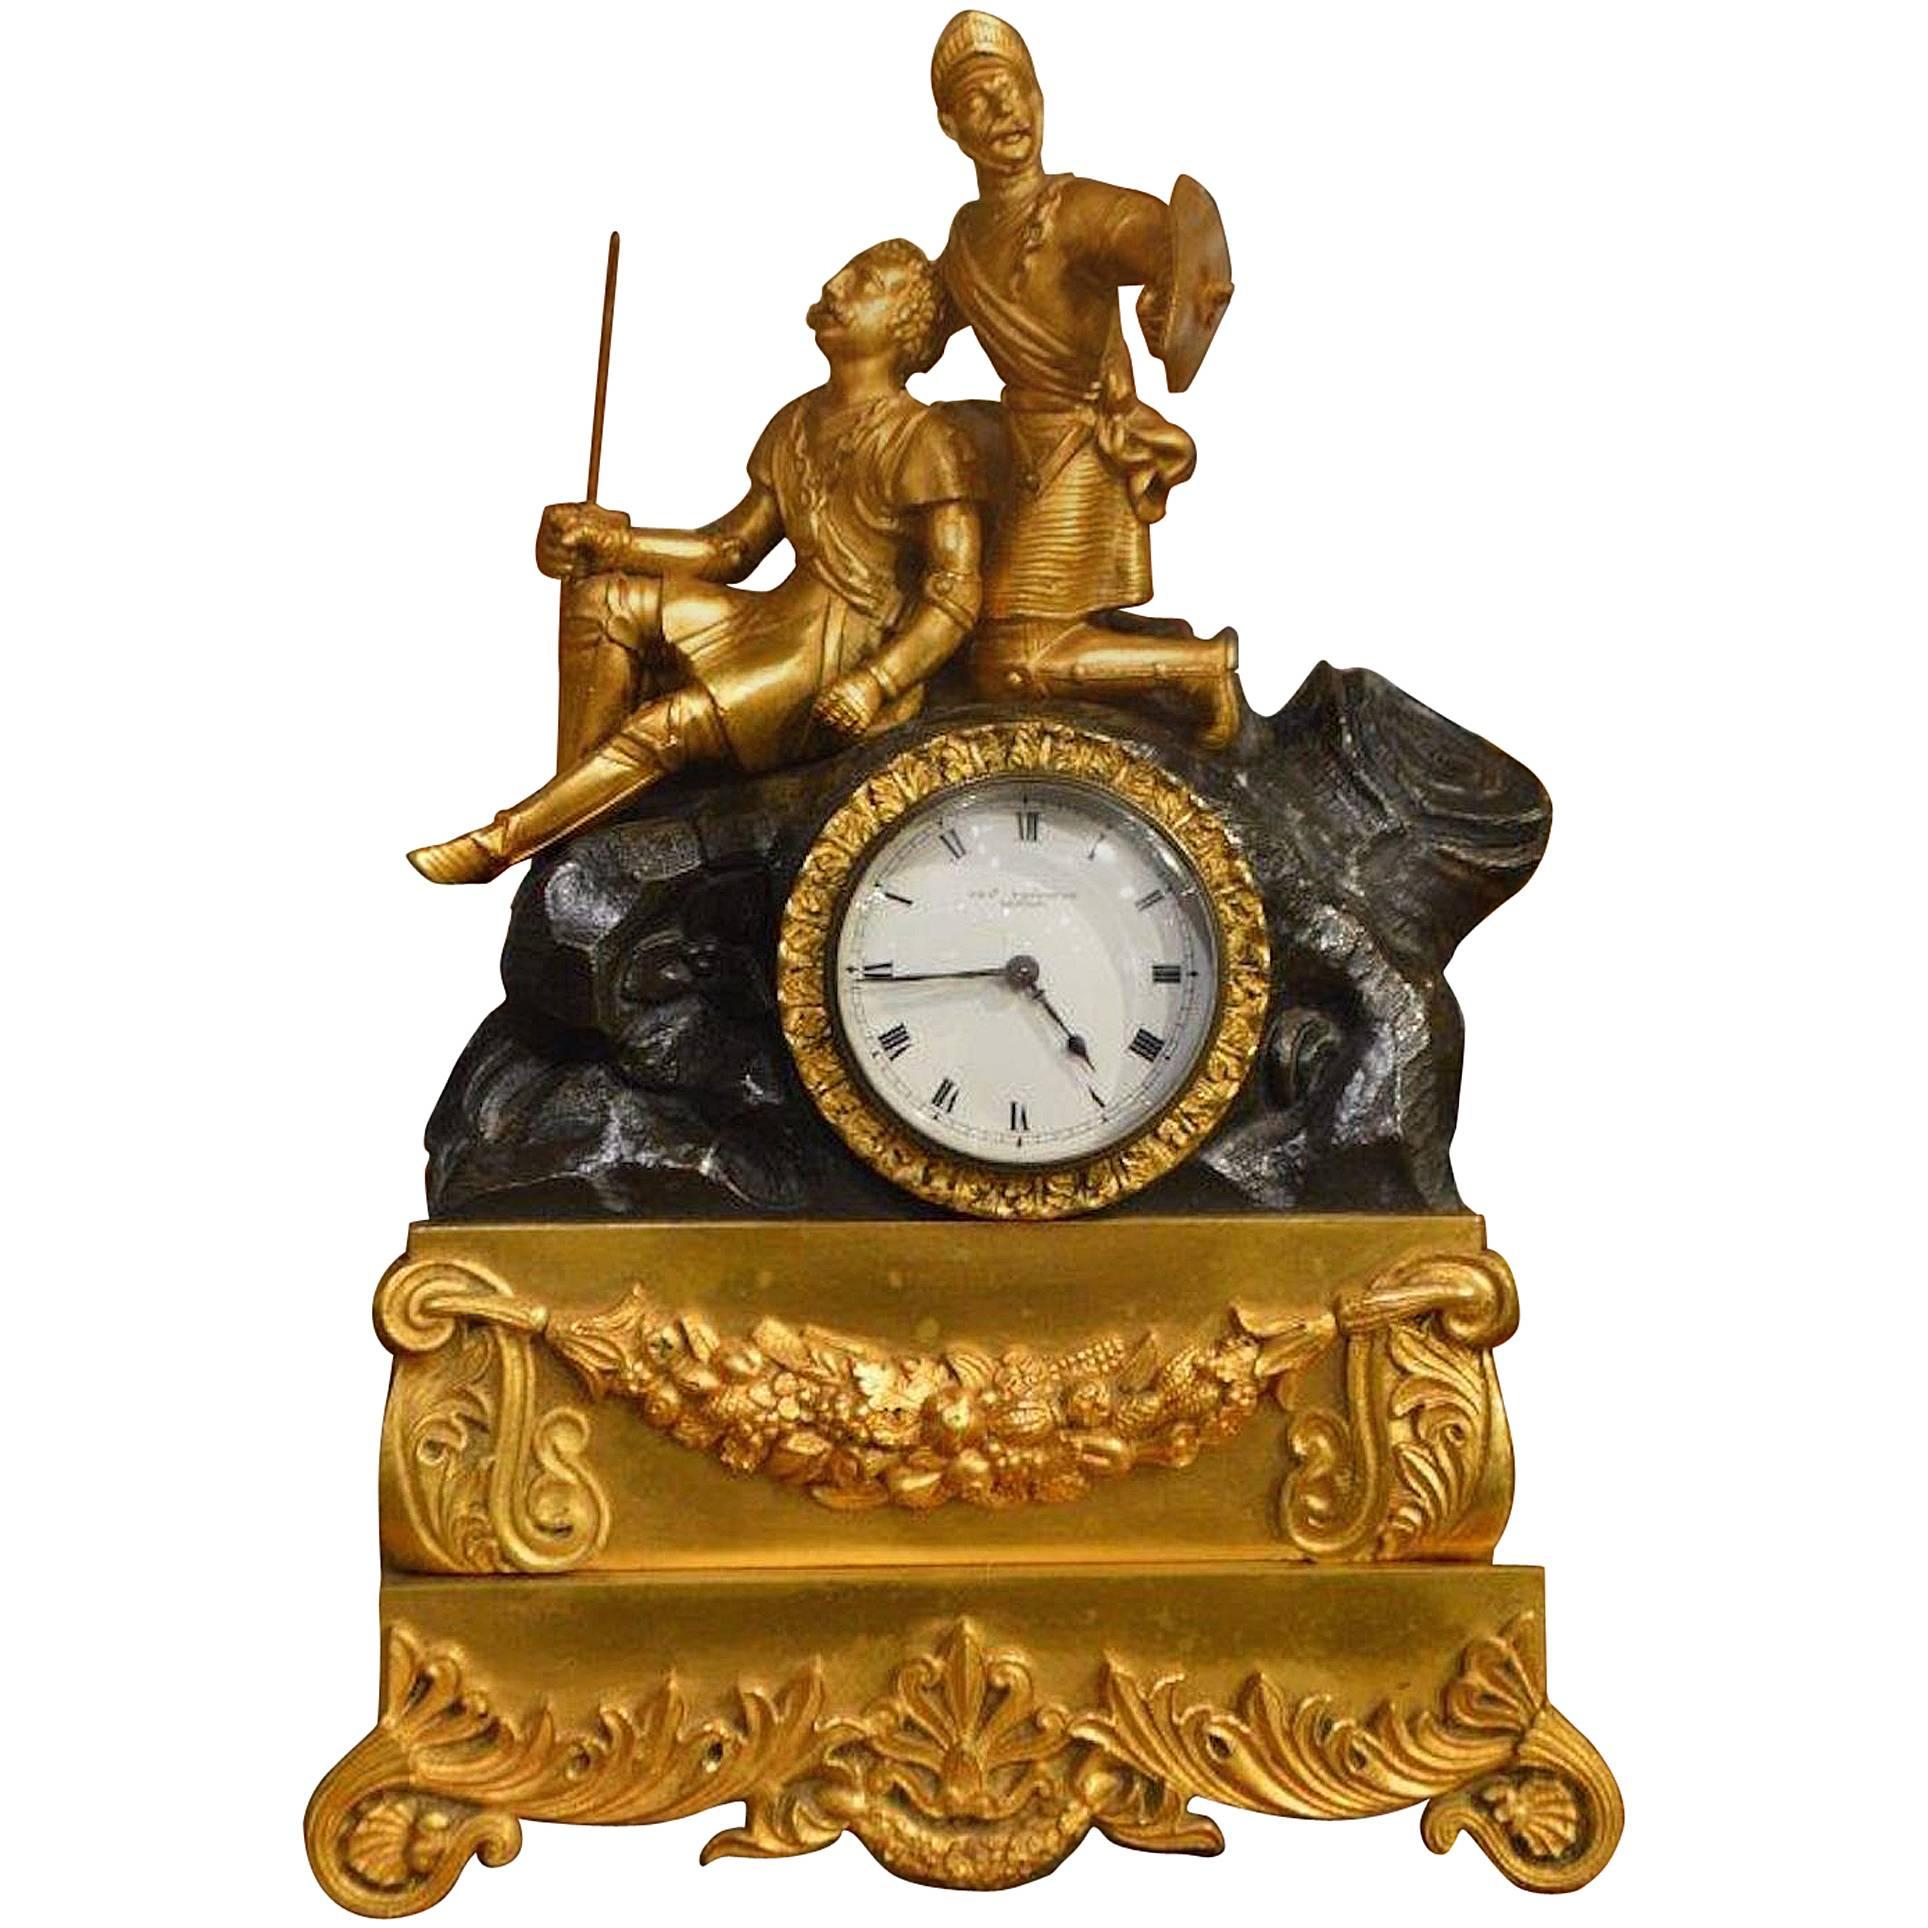 Bronze and Ormolu-Mounted Mid-19th Century Period Clock by Charles Frodsham